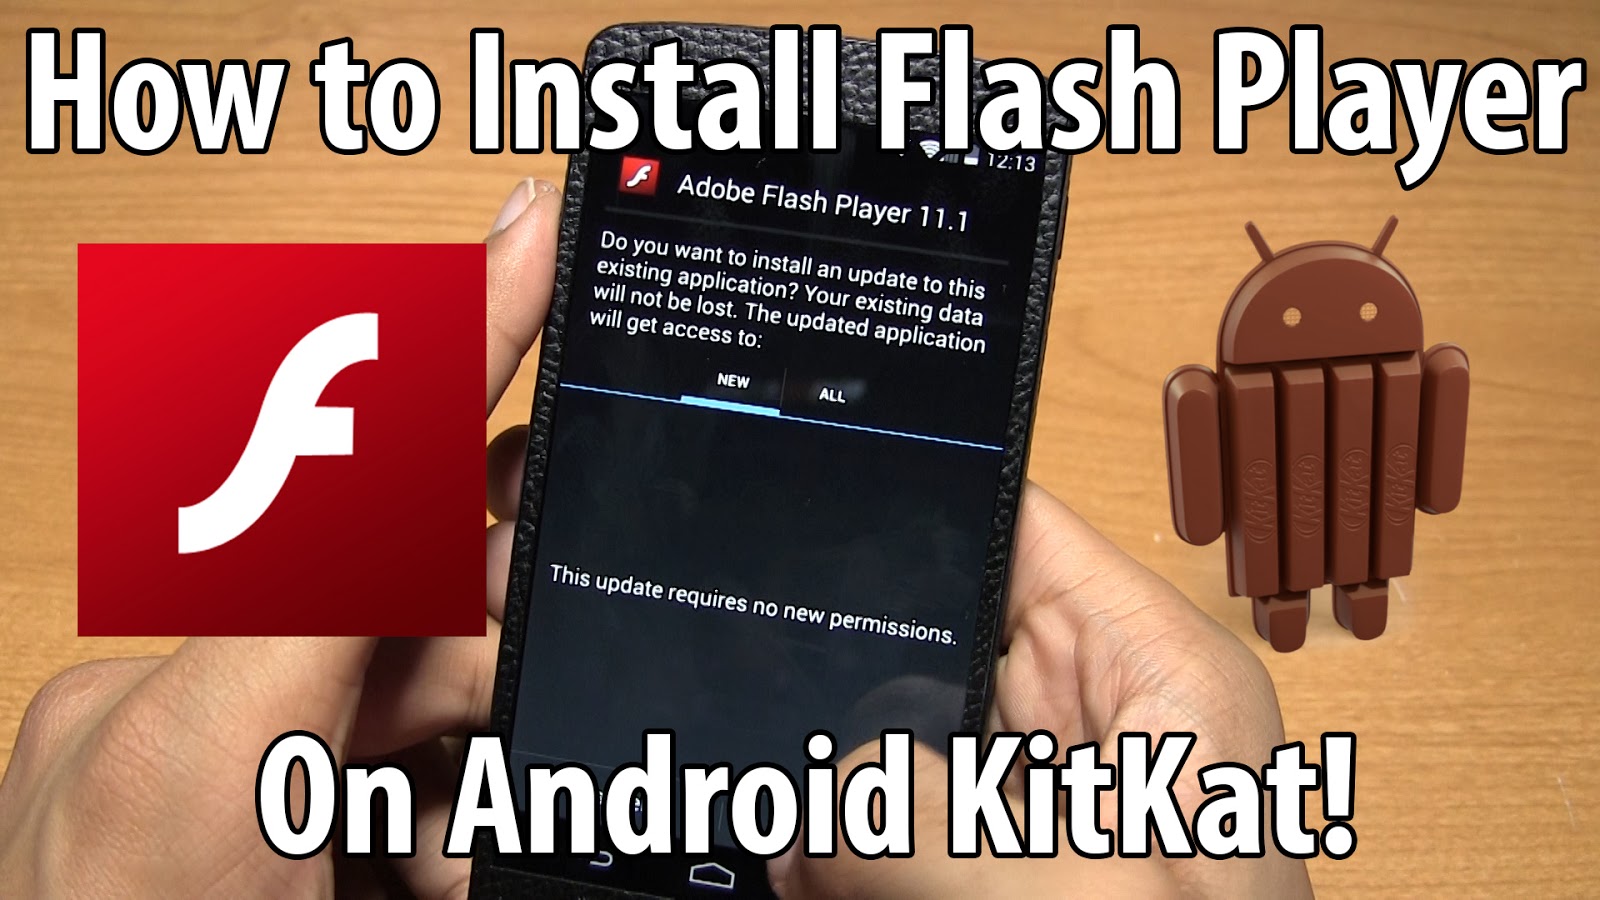 Adobe Flash Player For Android Download pintemore How+to+Install+Flash+Player+on+Android+KitKat